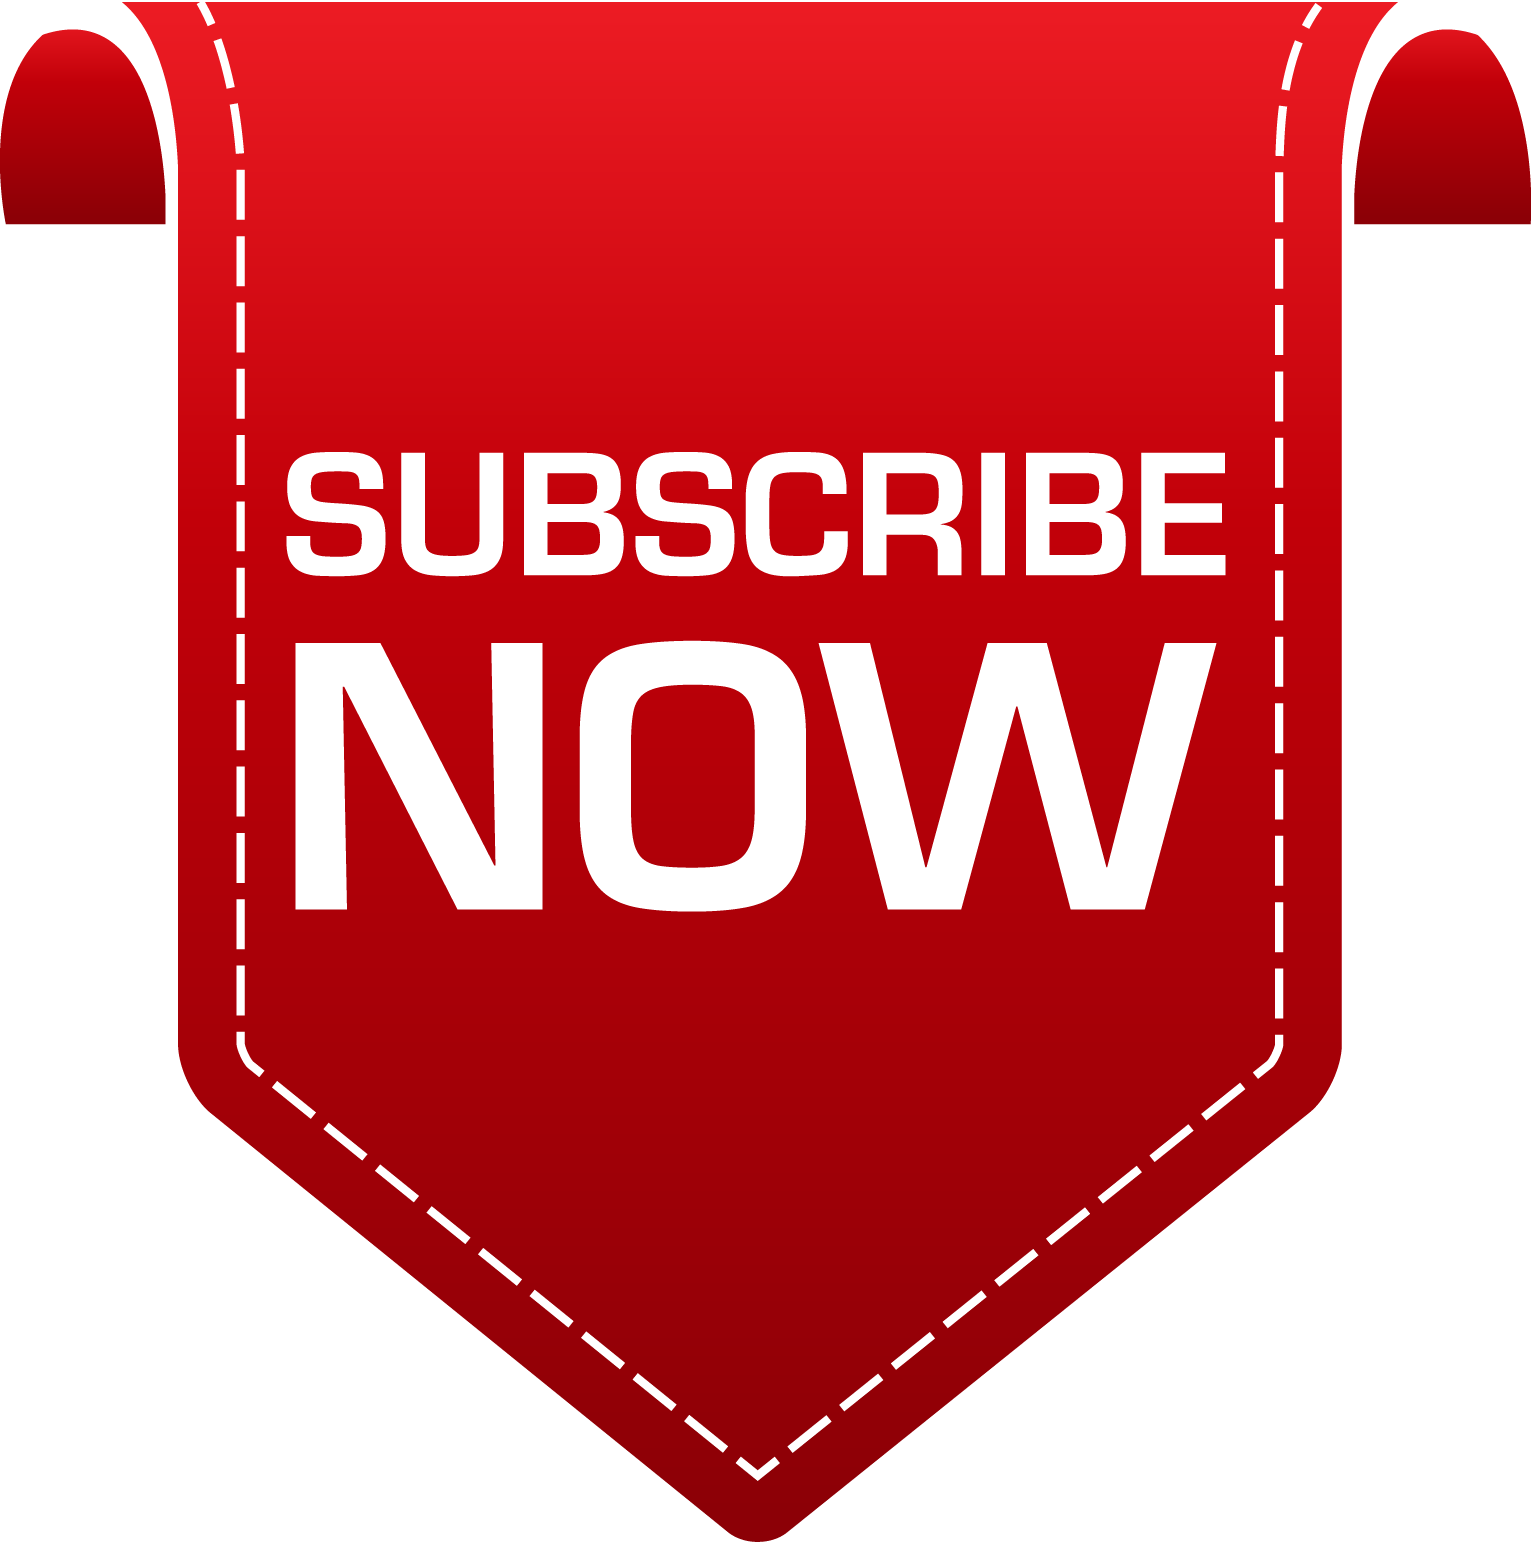 Subscribe pictures icons and. Free transparent png images